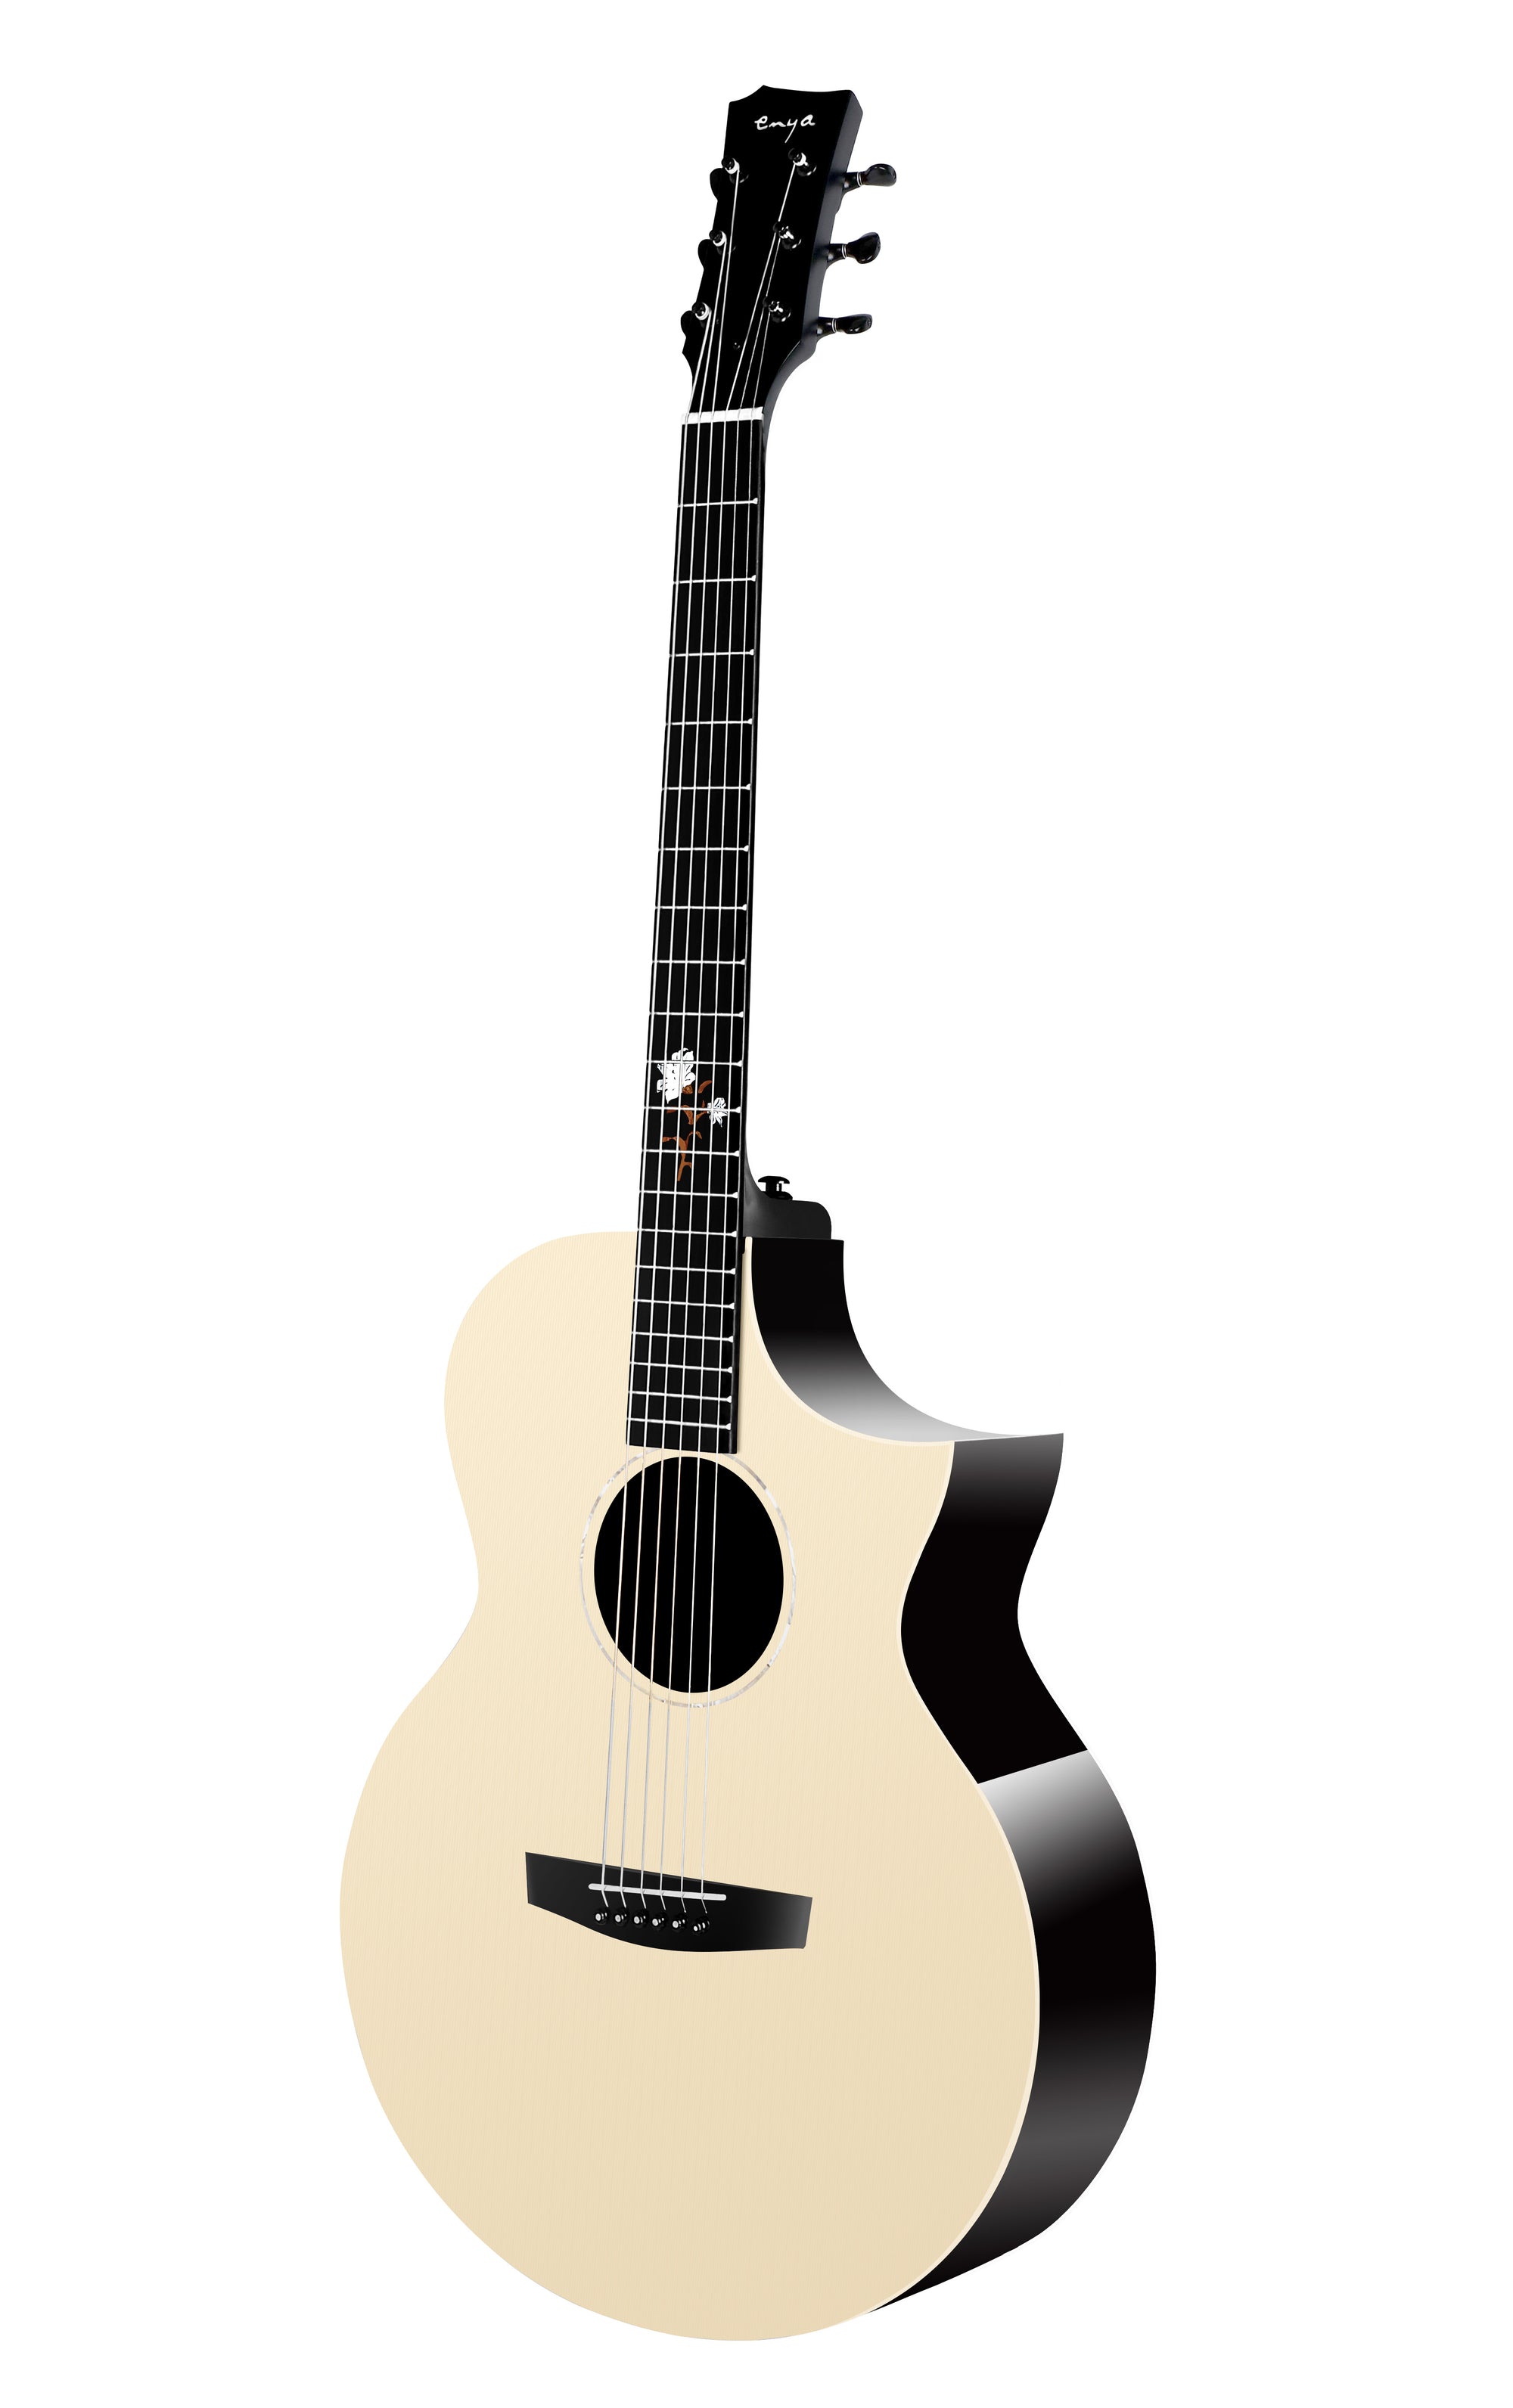 Enya EA-X2CPROEQ Electro-acoustic Guitar with Cutaway